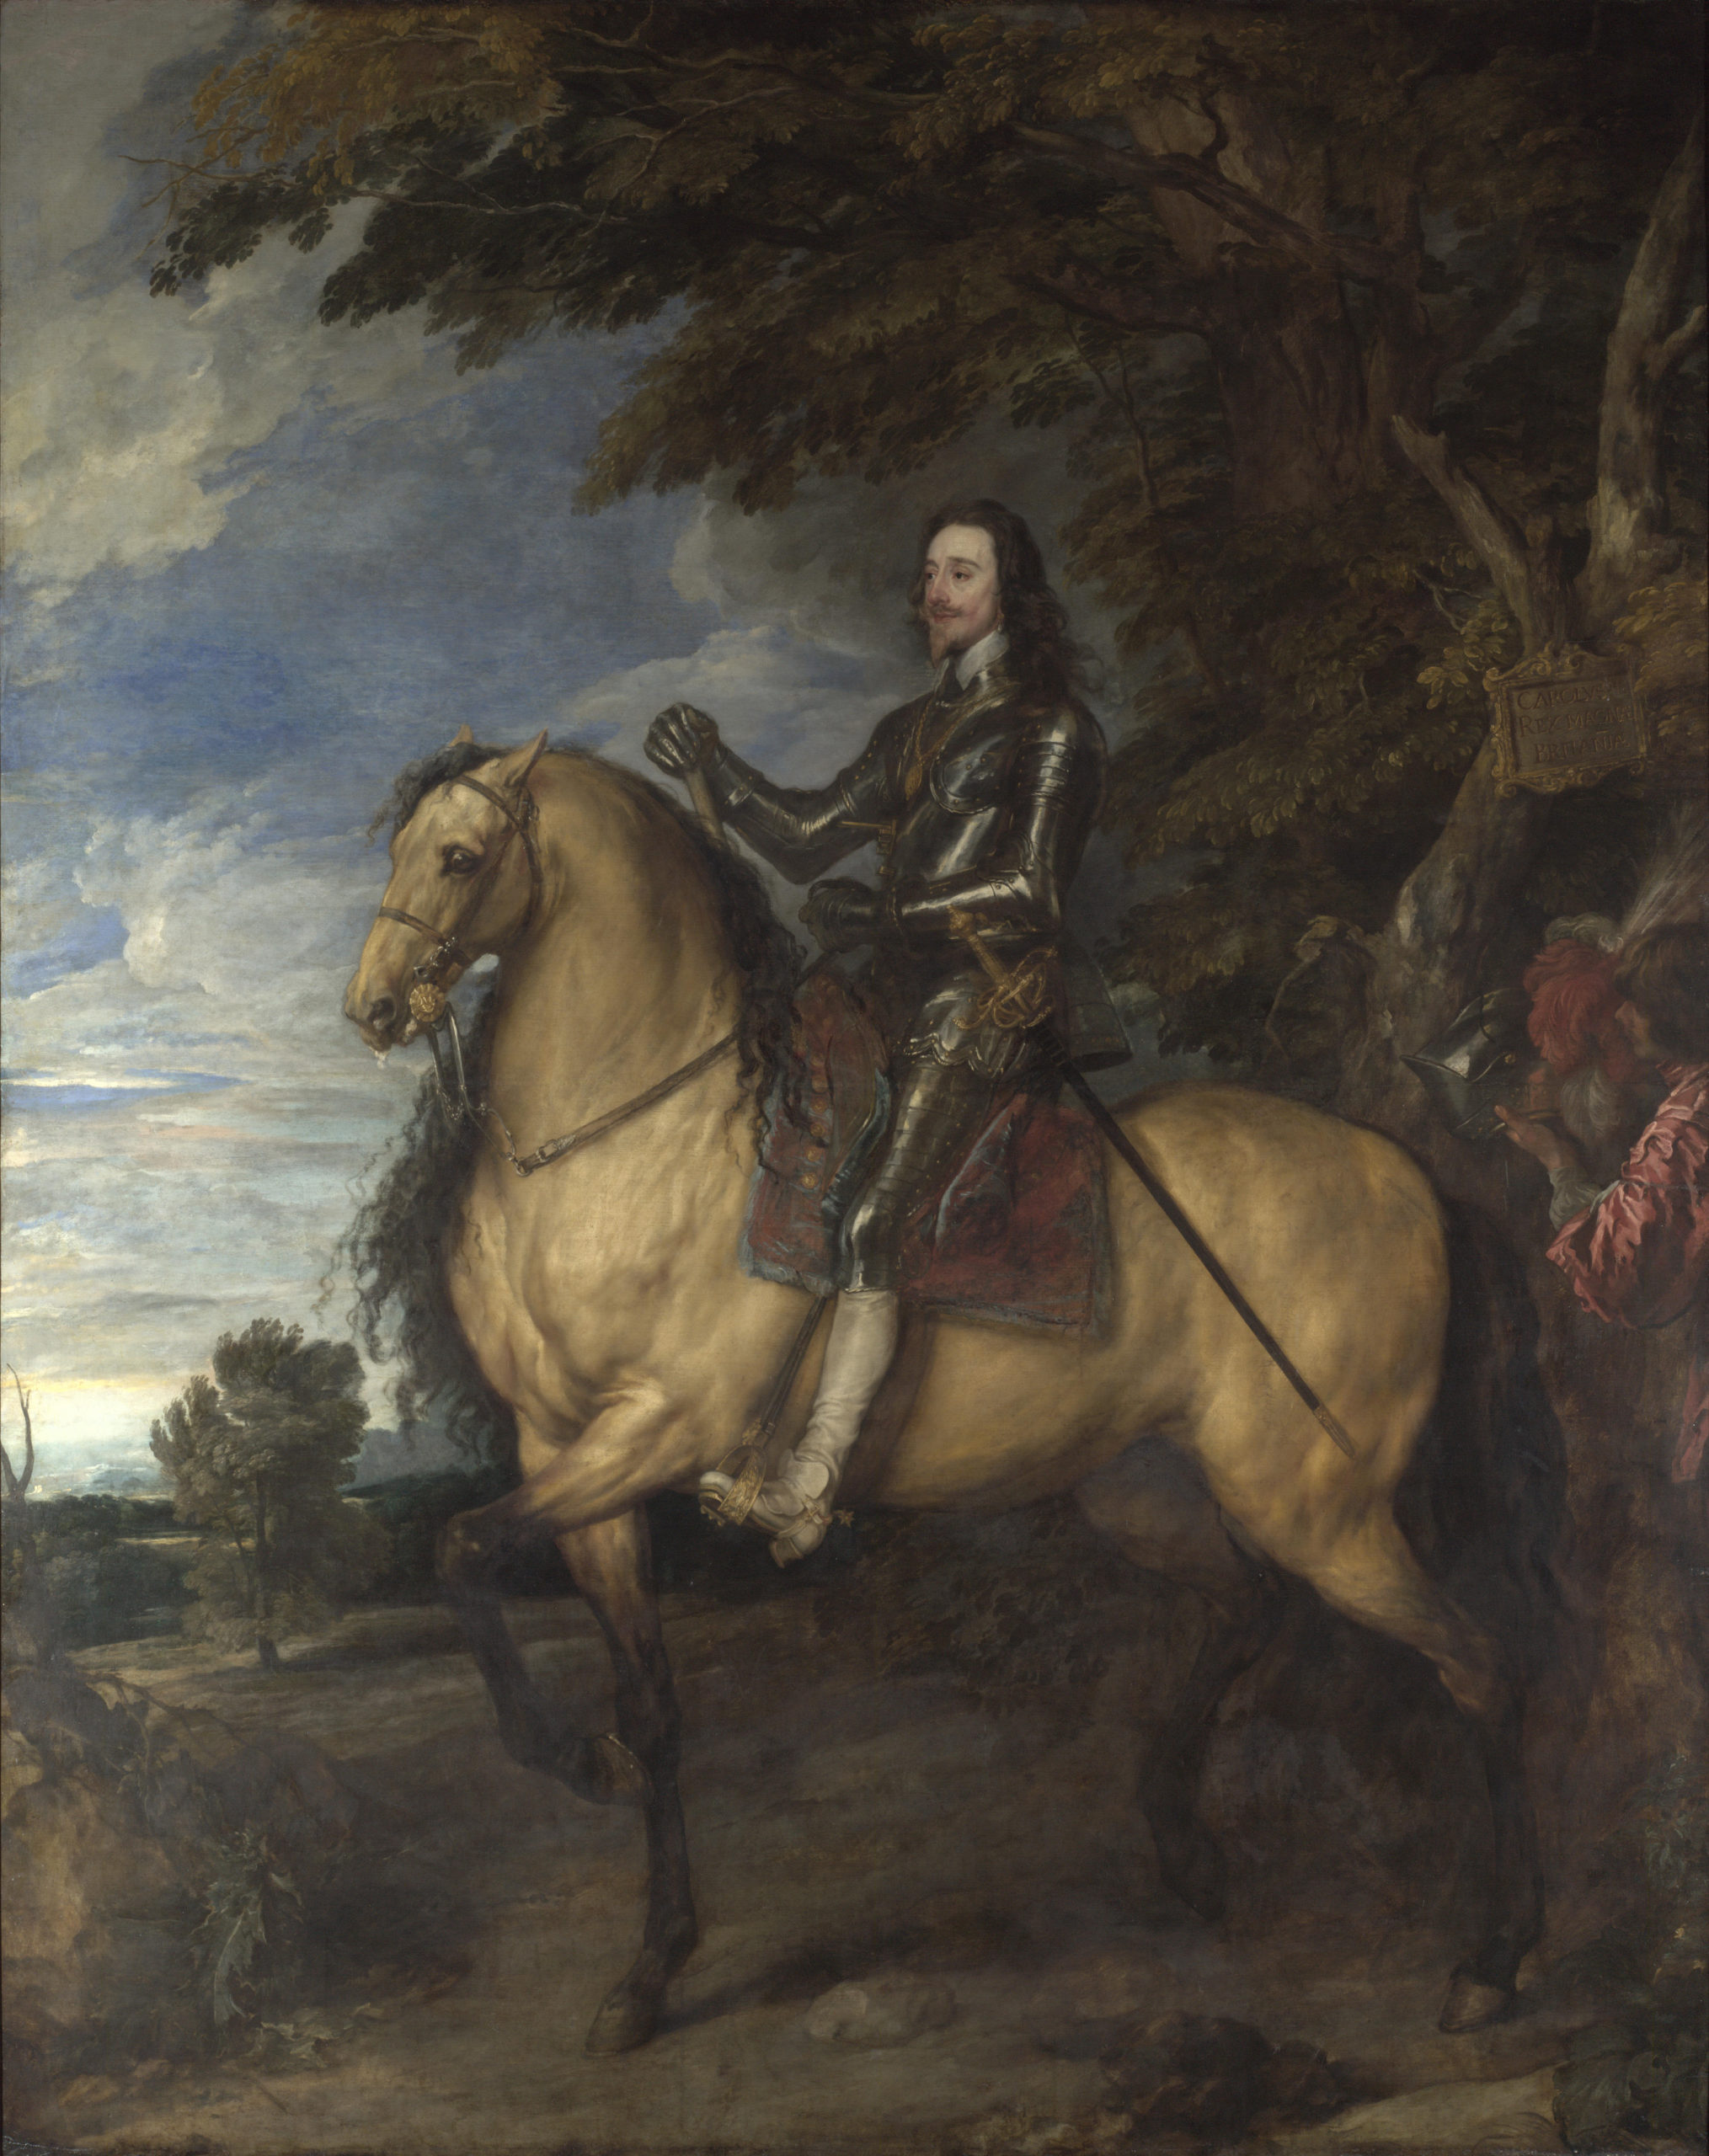 Anthony van Dyck, Equestrian Portrait of Charles I, c. 1637-8, oil on canvas, 367 x 292.1 cm (National Gallery, London)